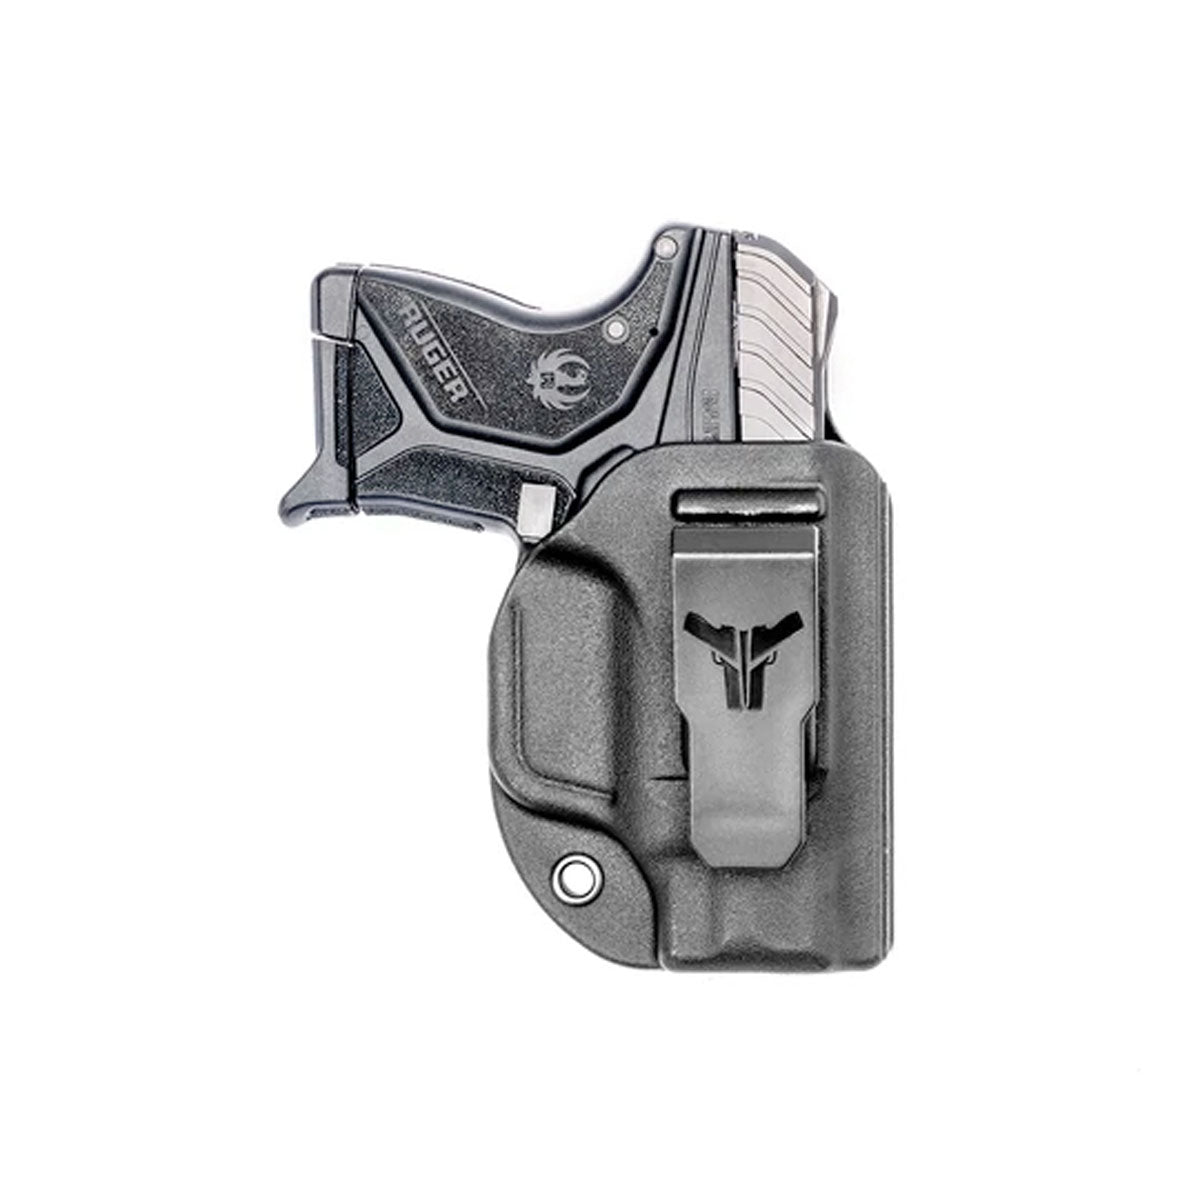 Blade-Tech Klipt IWB Holster Black Right Hand Only Holsters Blade-Tech Holsters Ruger LCPII Tactical Gear Supplier Tactical Distributors Australia